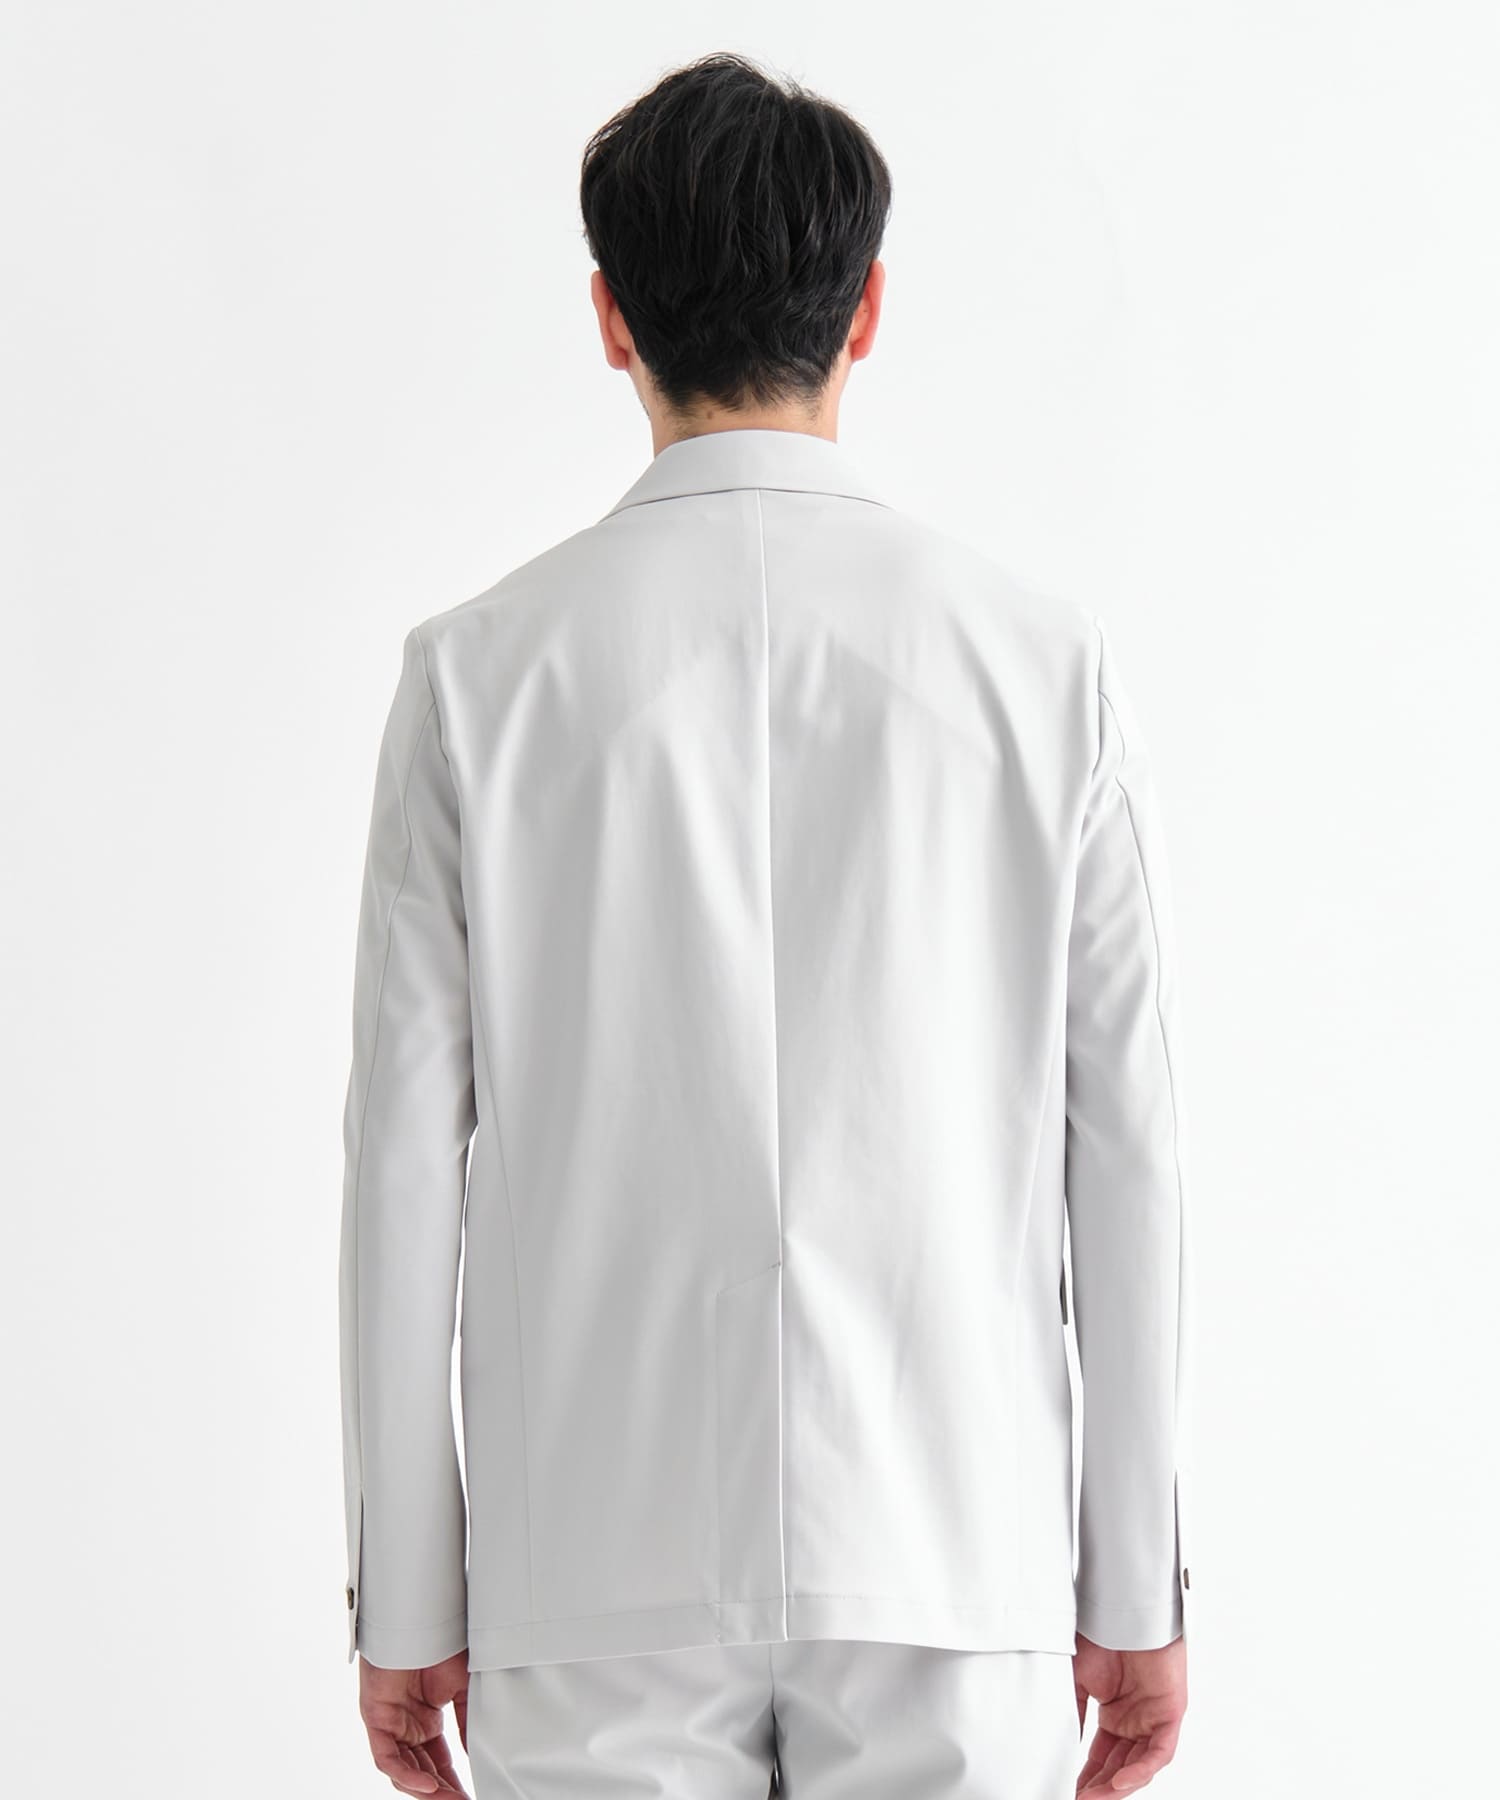 Washable High Function Jersey Shape Jacket THE TOKYO